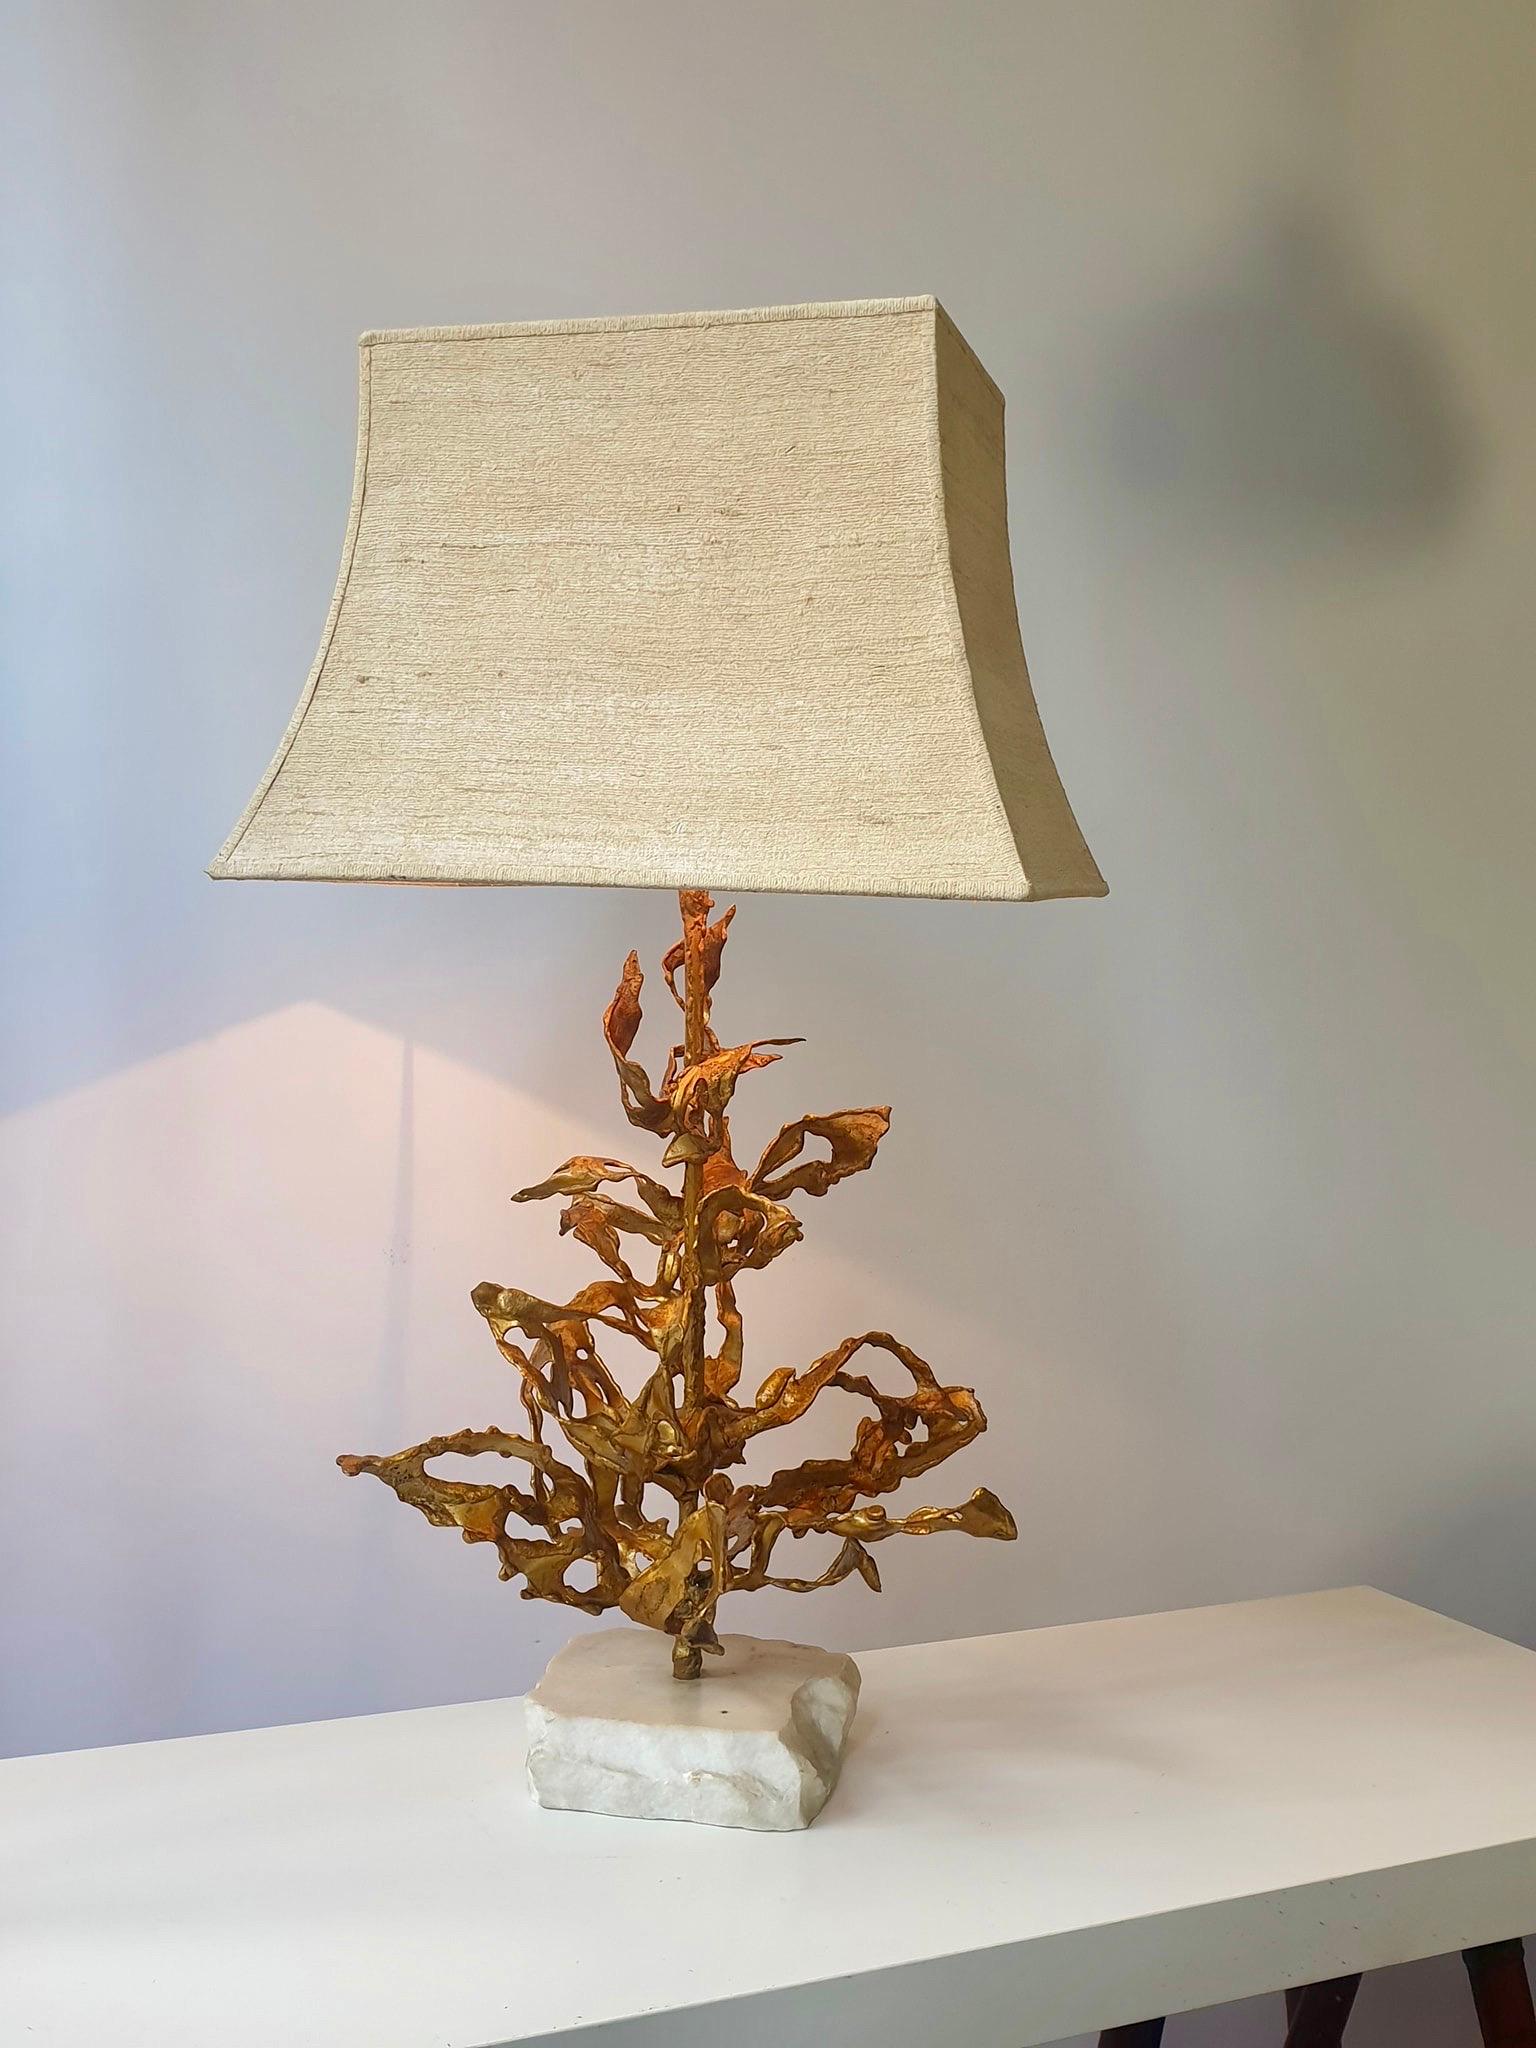 Rare handmade table lamp signed by Paul Moerenhout. 

He was a midcentury artist and designer and manufactured brass/bronze table lamps, mostly natural designs, in a beautiful way. 
 
This Brutalist sculptural lamp is no exception. 

Great